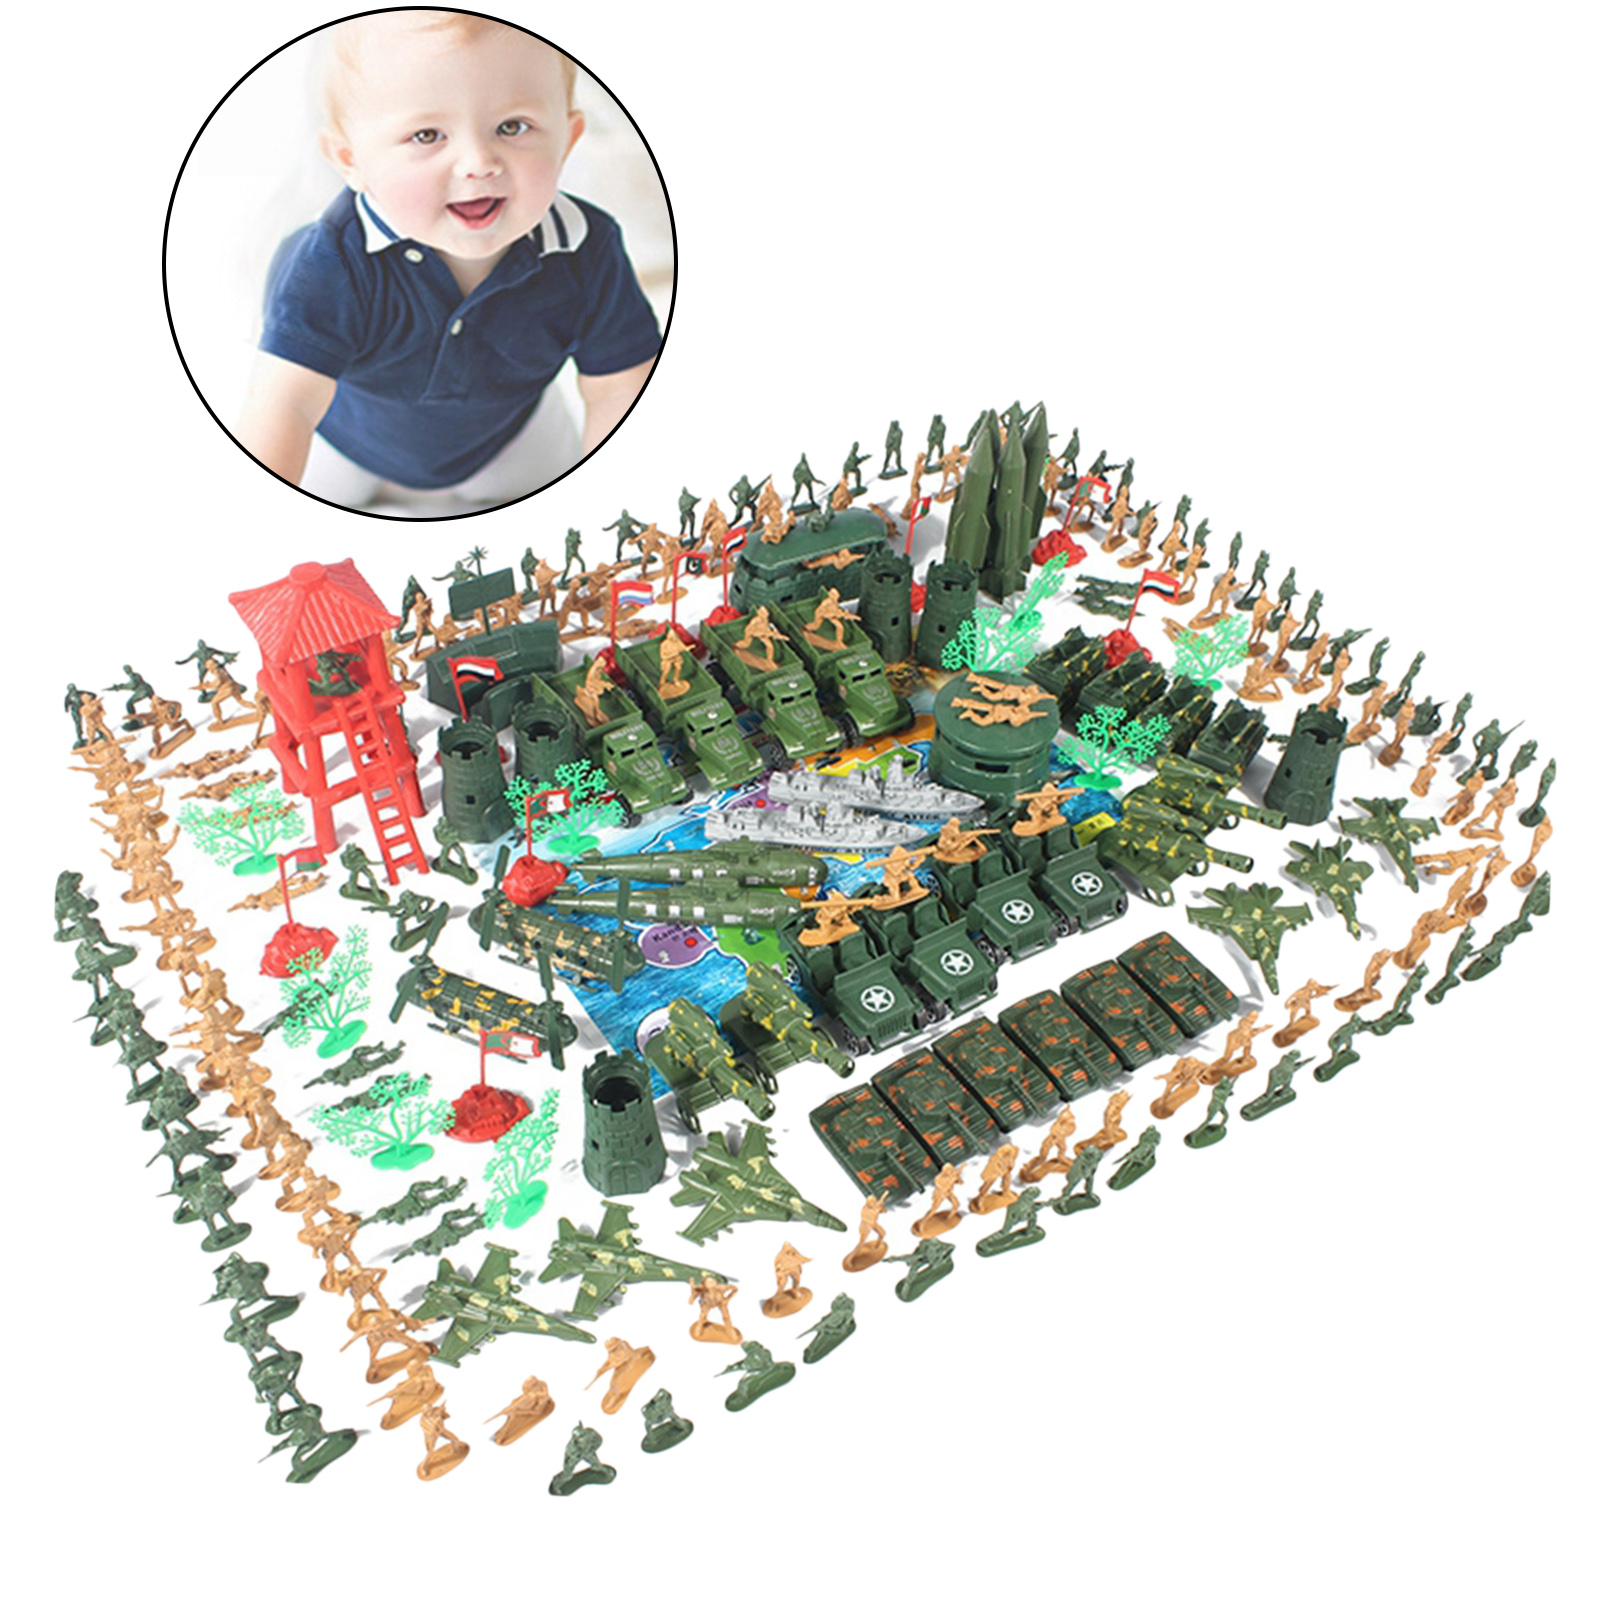 Army Men Play Set Mini Action Figure with Soldiers Toys Pretend Play Gifts